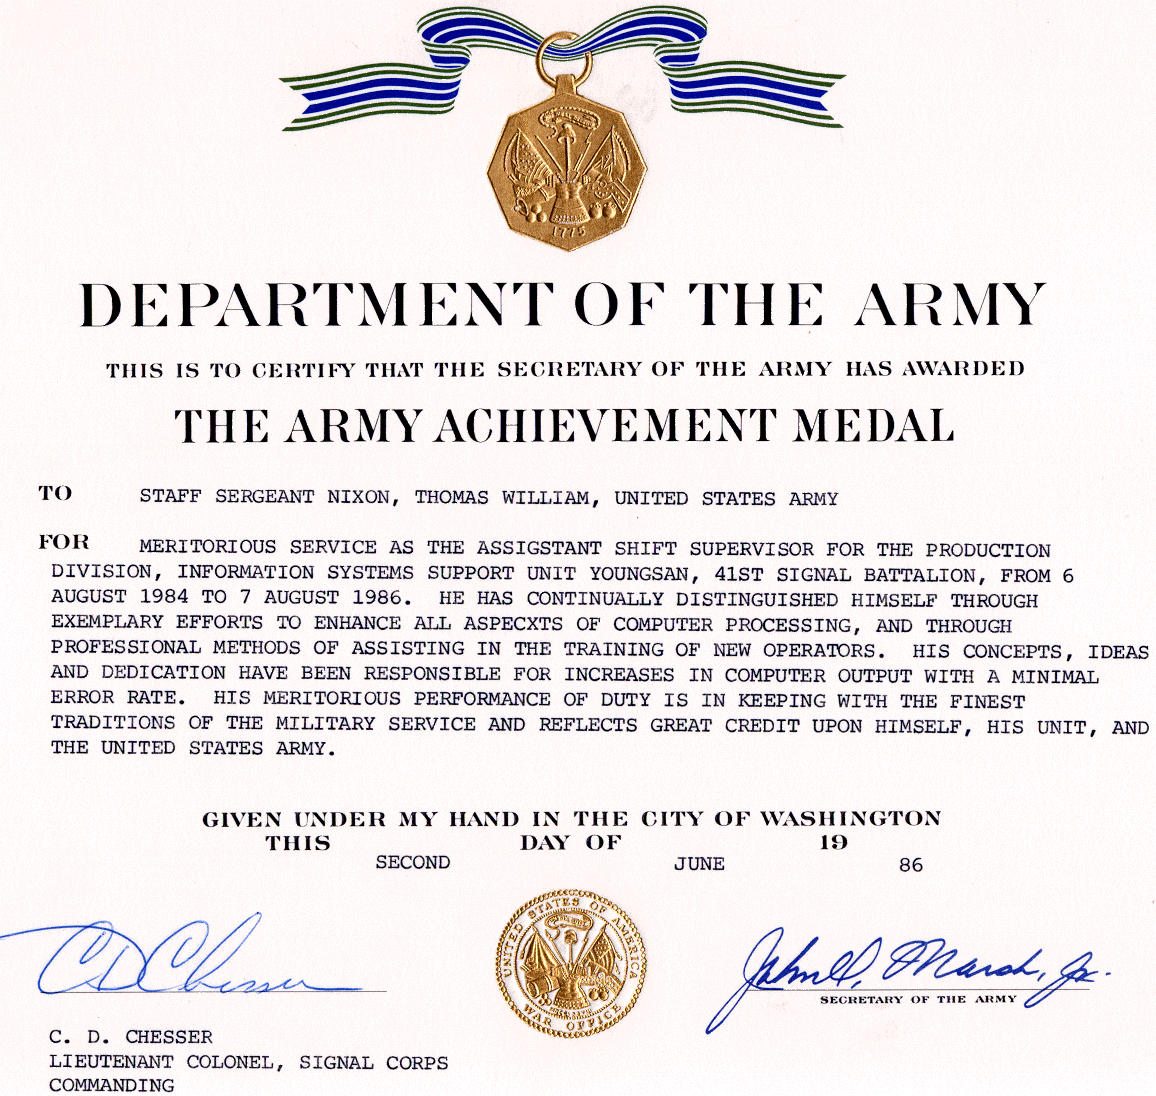 U.S. Army medal certificate font - Font Identification For Army Certificate Of Achievement Template